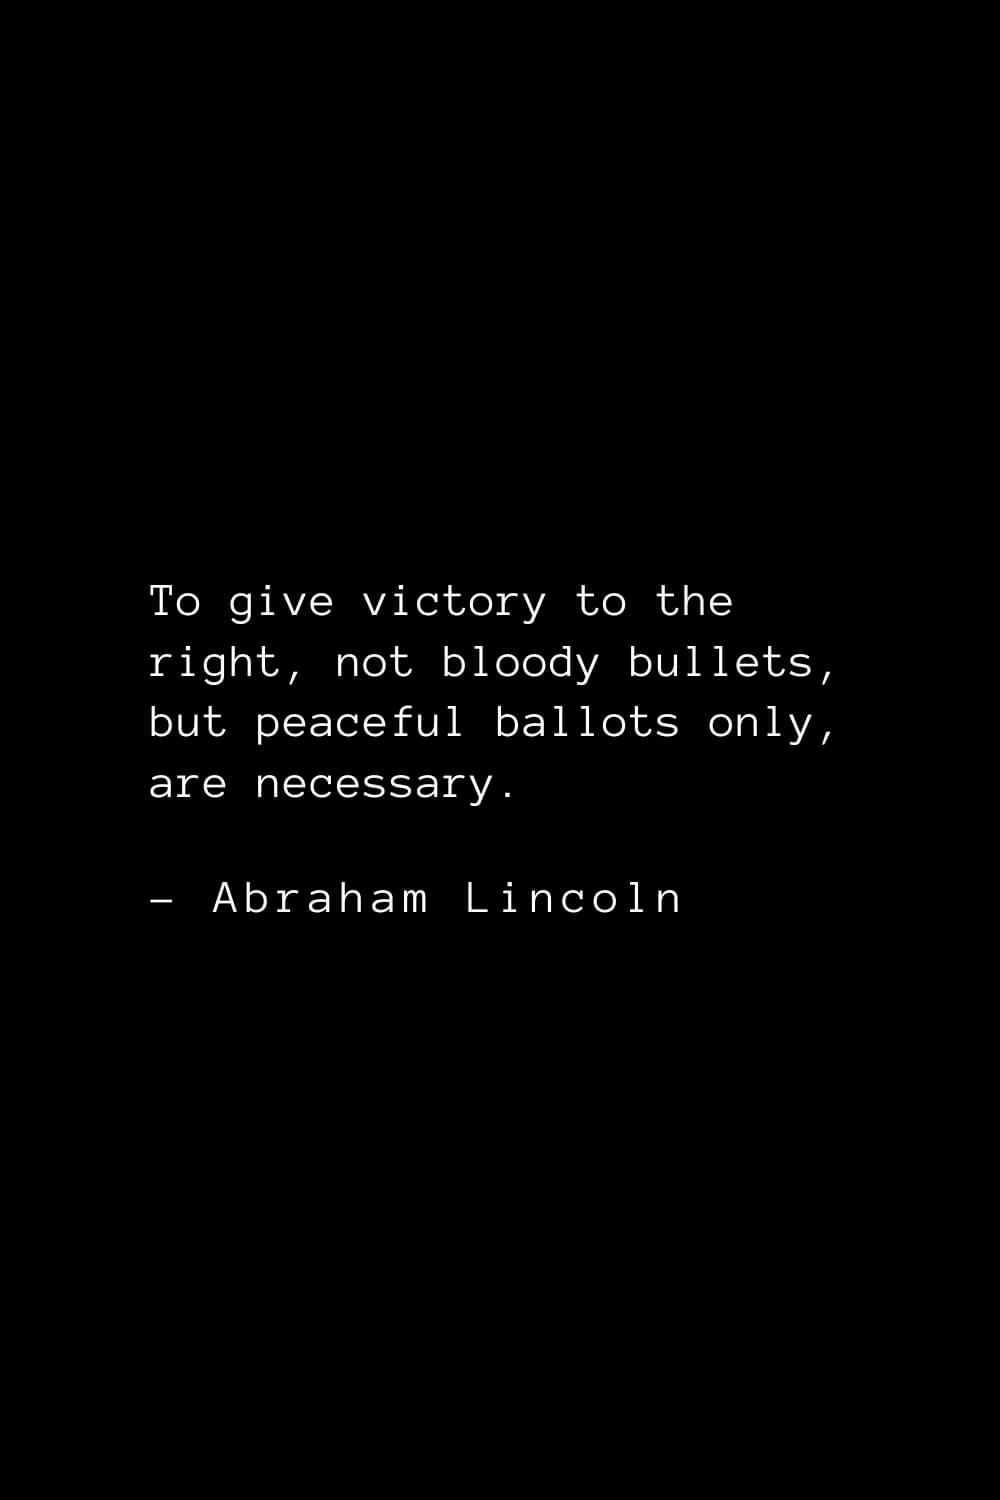 abraham lincoln freedom quotes